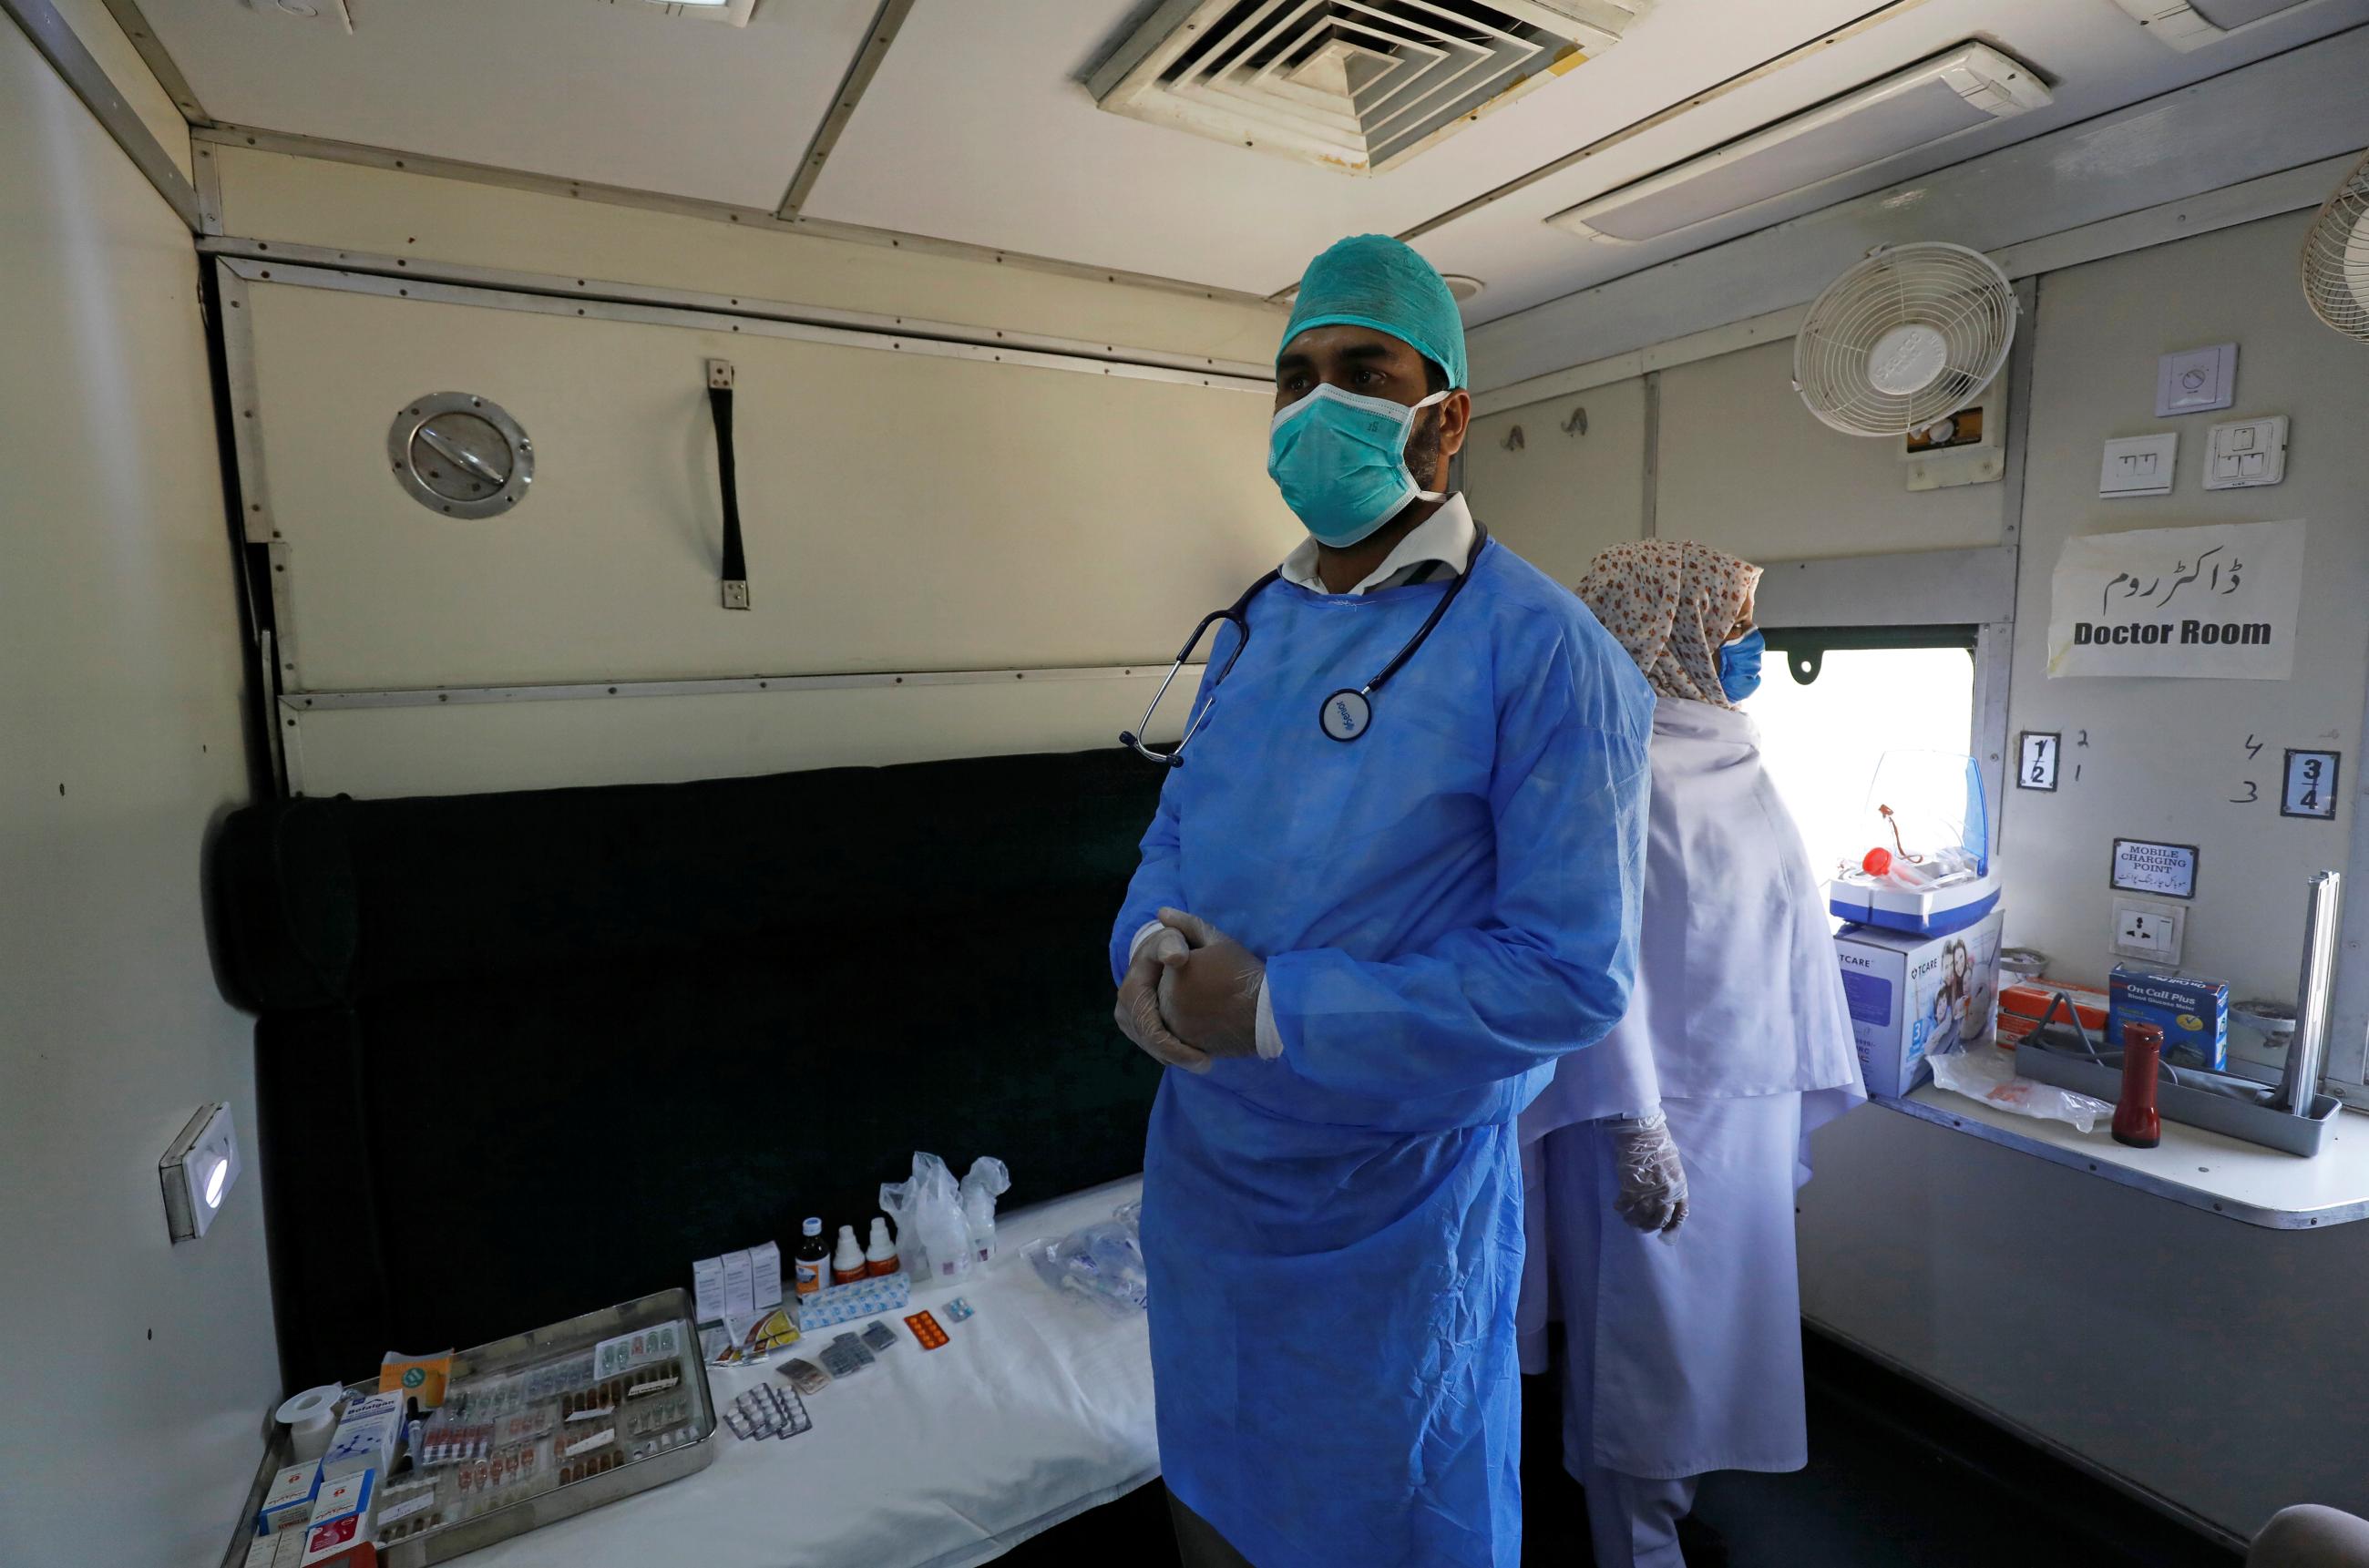 A doctor and nurse wear protective masks as they stand in a passenger train's car, after the government turned it into a hospital and quarantine center following the outbreak of coronavirus disease (COVID-19), in Karachi, Pakistan, on March 31, 2020. REUTERS/Akhtar Soomro